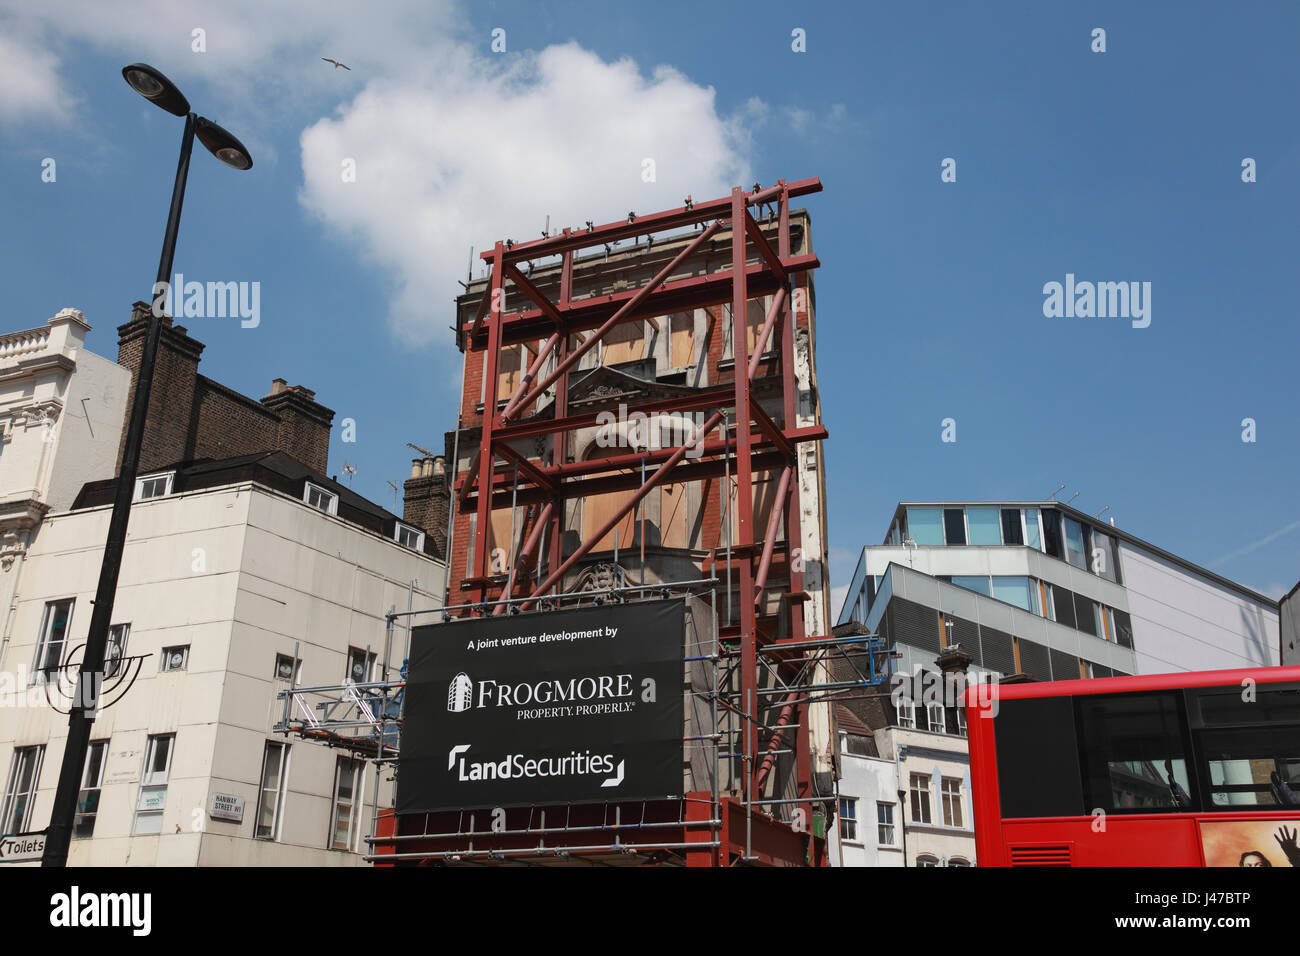 A joint venture development on Oxford Street, central London, by Frogmore Property and Land Securities Stock Photo